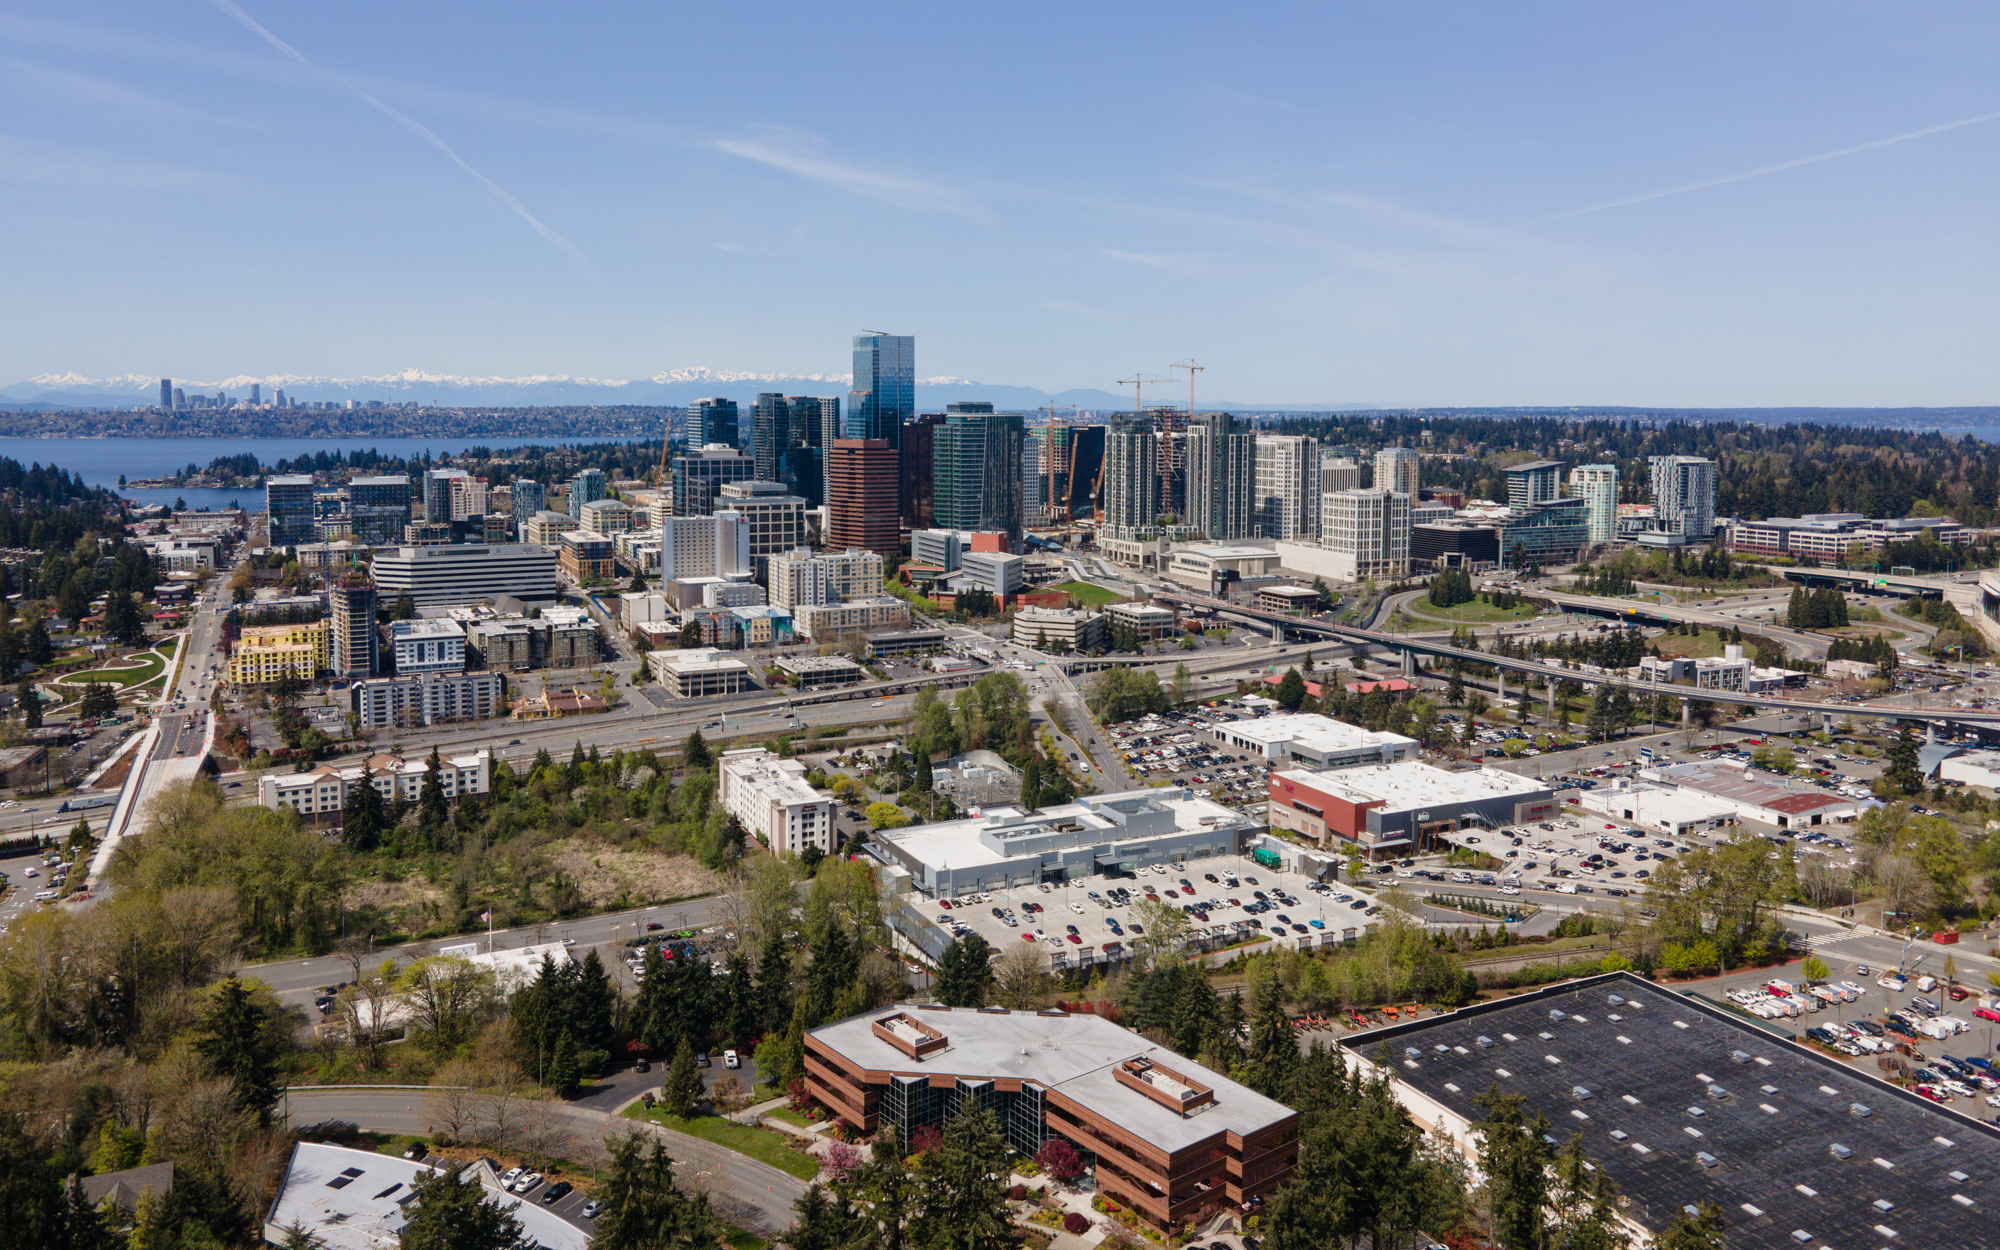 A sky view of a city in Bellevue